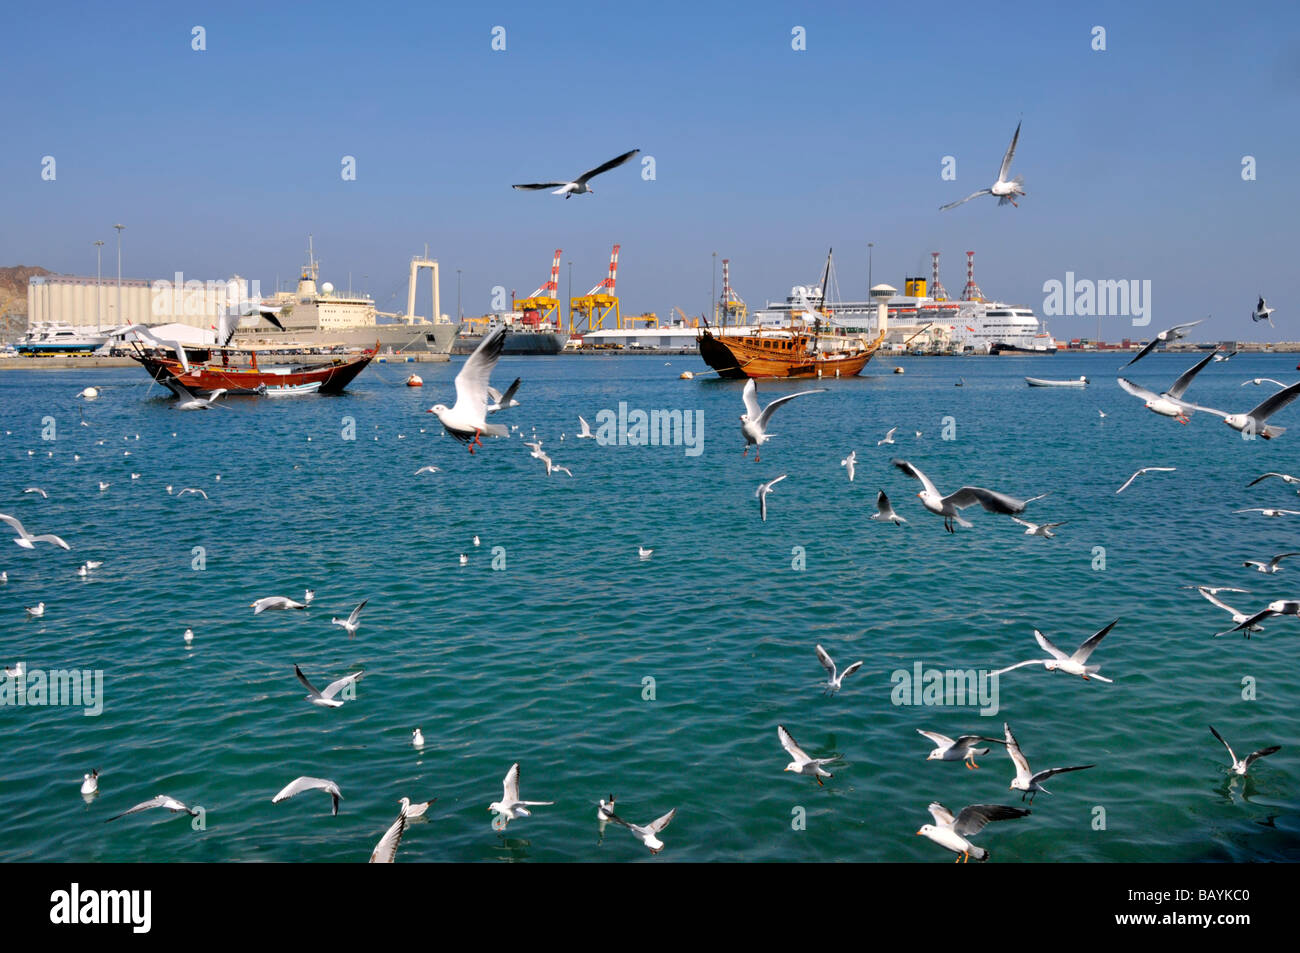 Muscat Dhows moored in Muttrah harbour in seascape with Costa cruise ship docked in Port Sultan Qaboos beyond seagulls in flight Oman Gulf of Oman Stock Photo